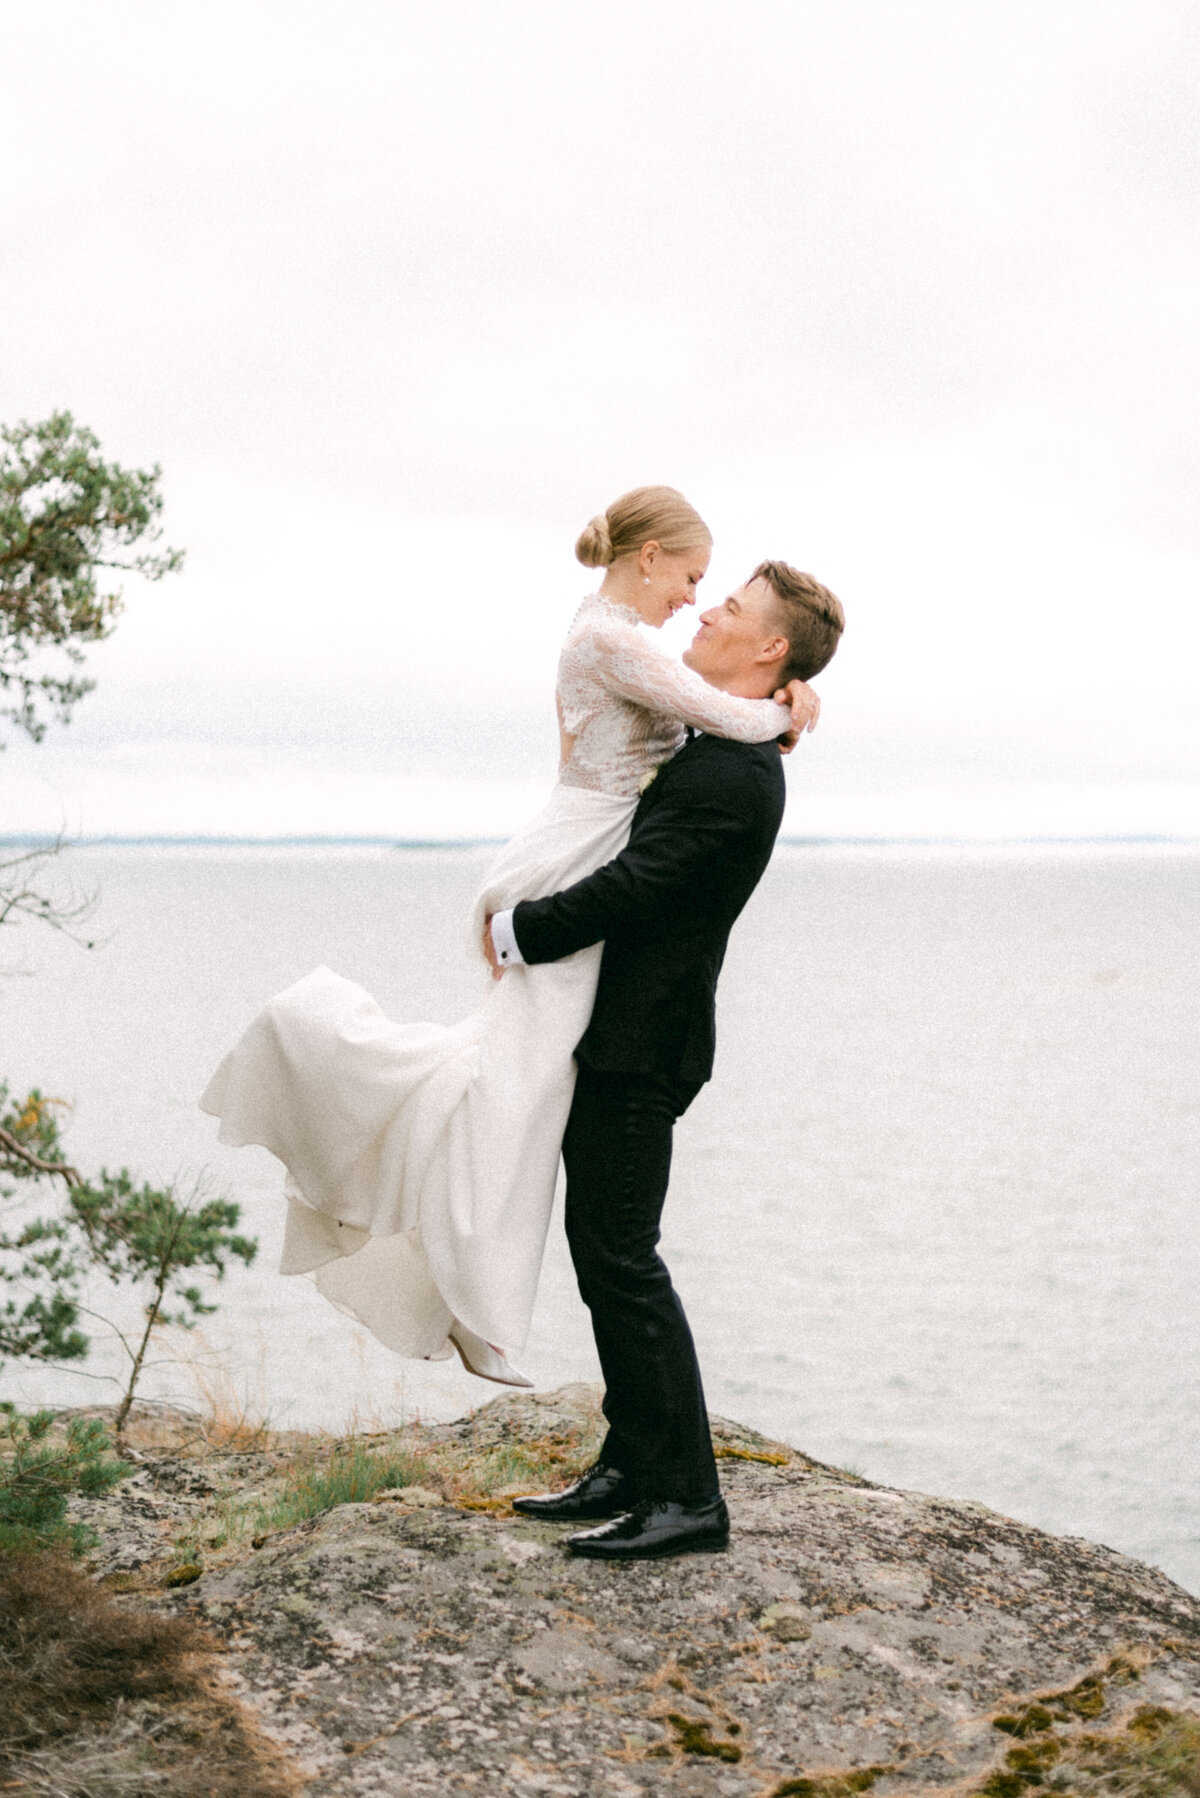 The groom is lifting the bride in a romantic wedding photograph by photographer Hannika Gabrielsson.